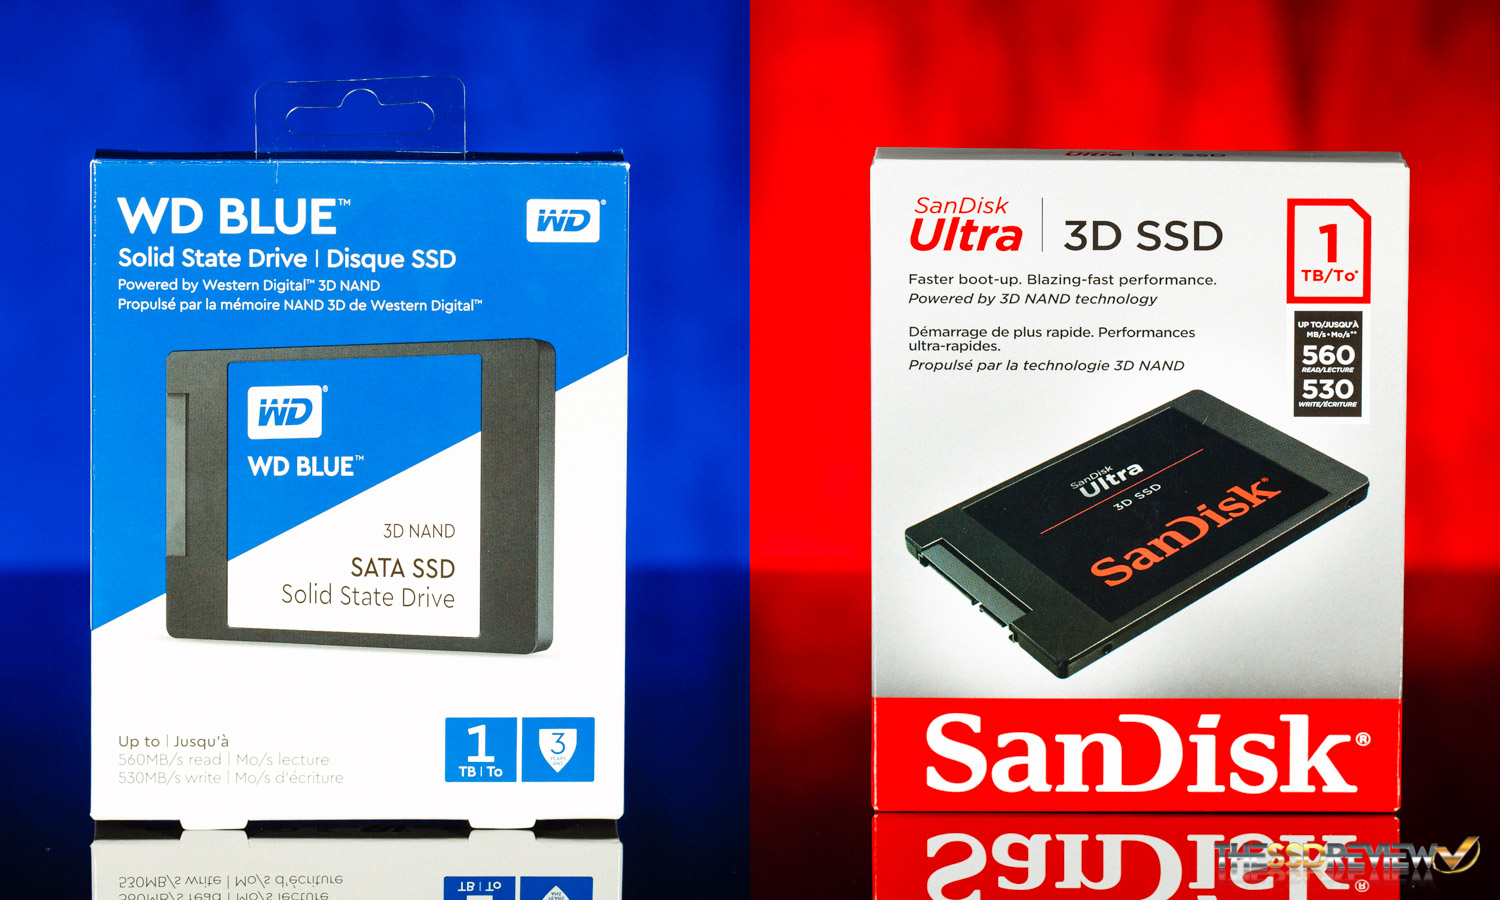 WD Blue 3D SSD & SanDisk Ultra 3D SSD Review (1TB) - Twins That the Best | The SSD Review